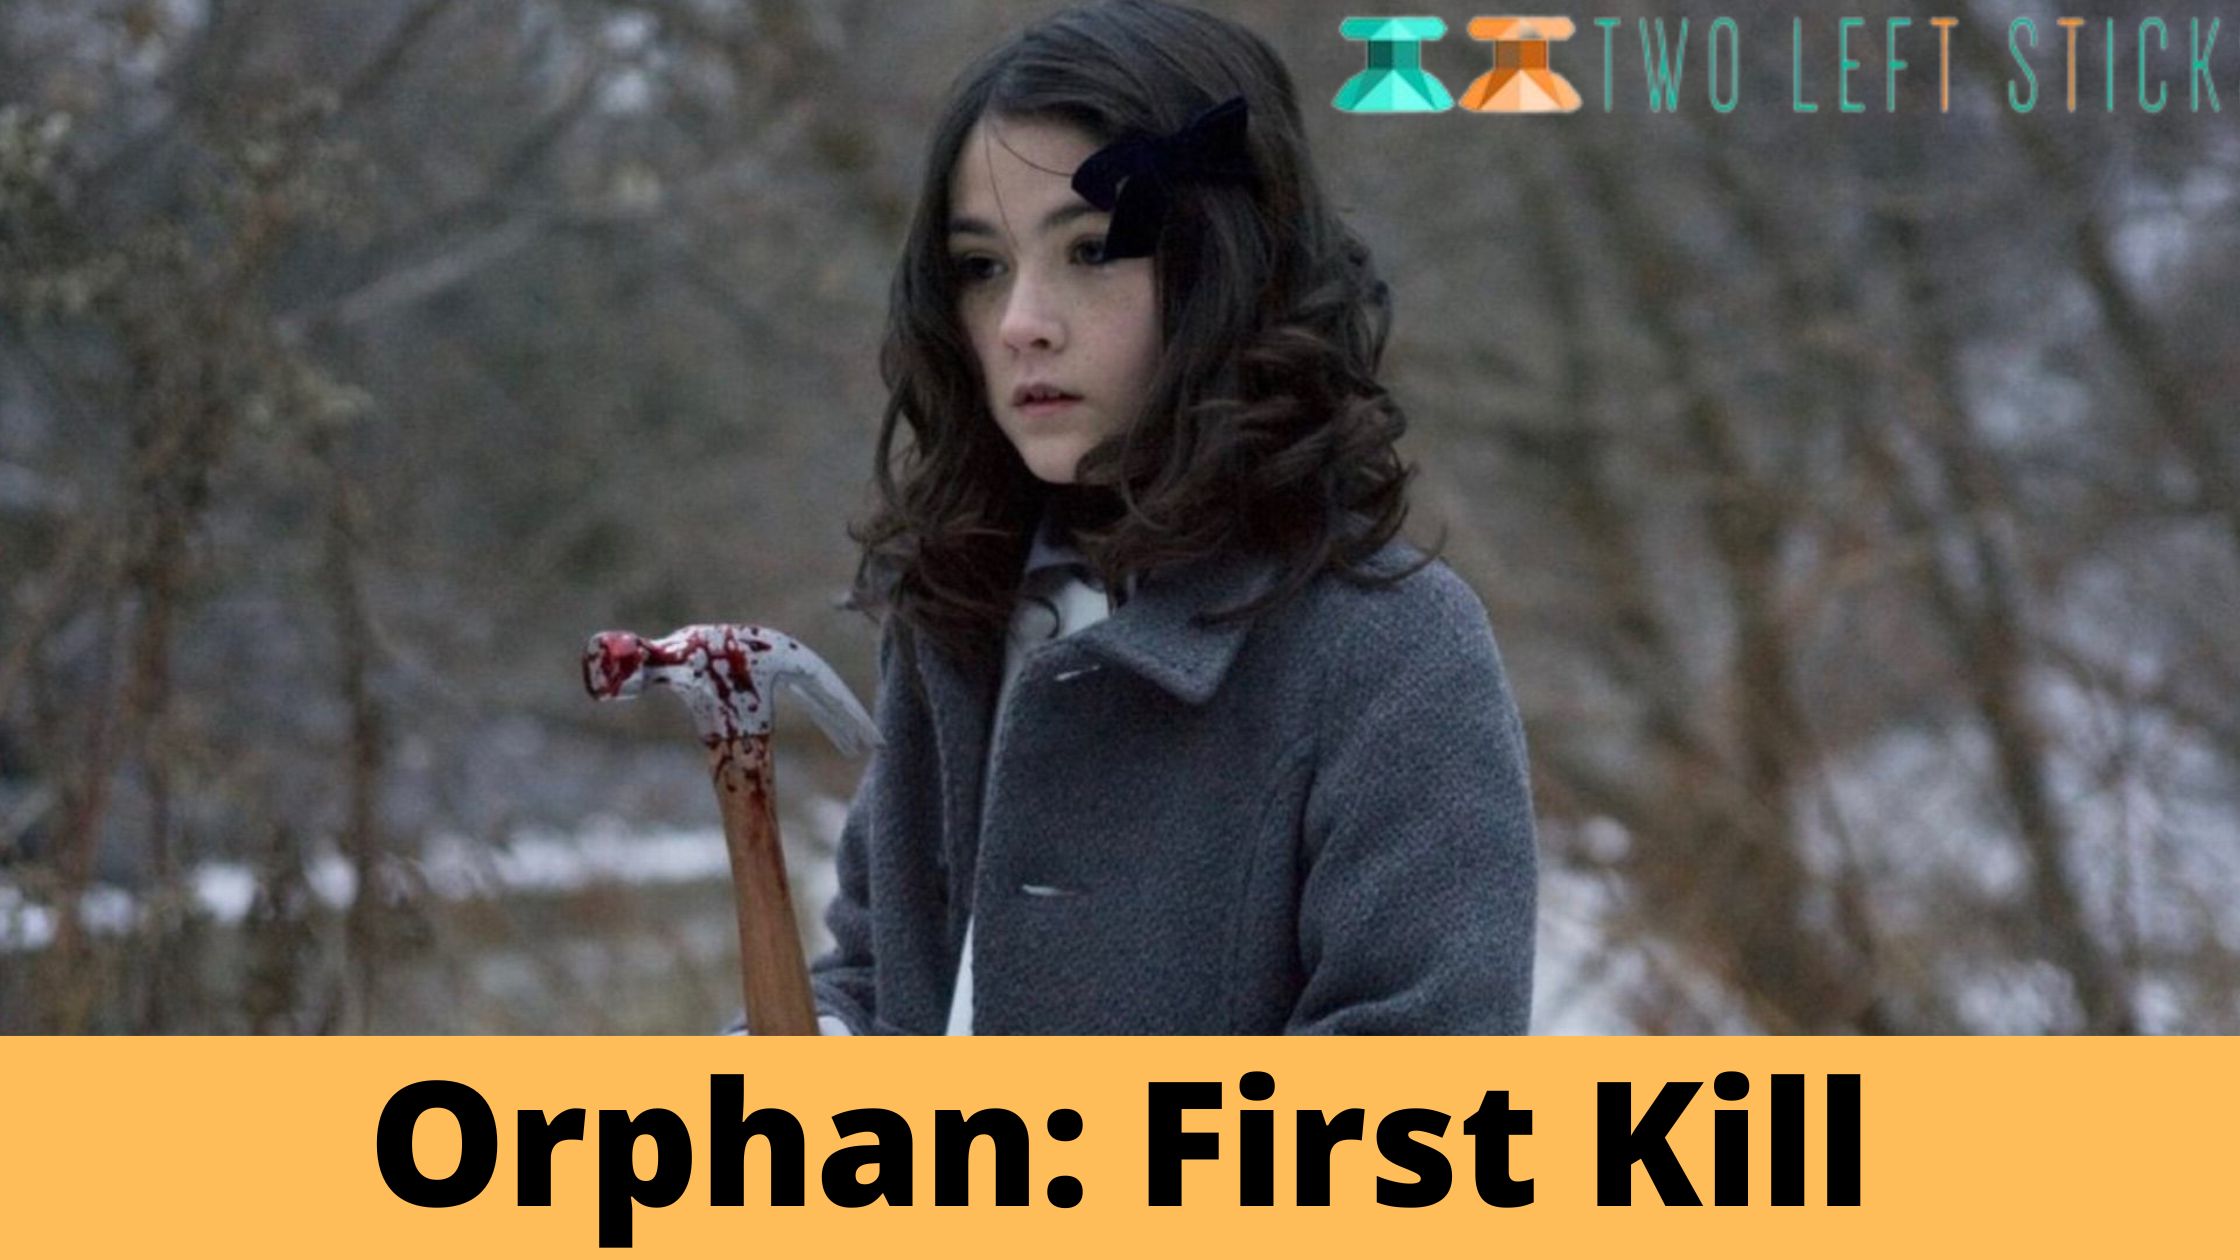 Orphan First Kill- Information about the Cast, Trailer, and Plot